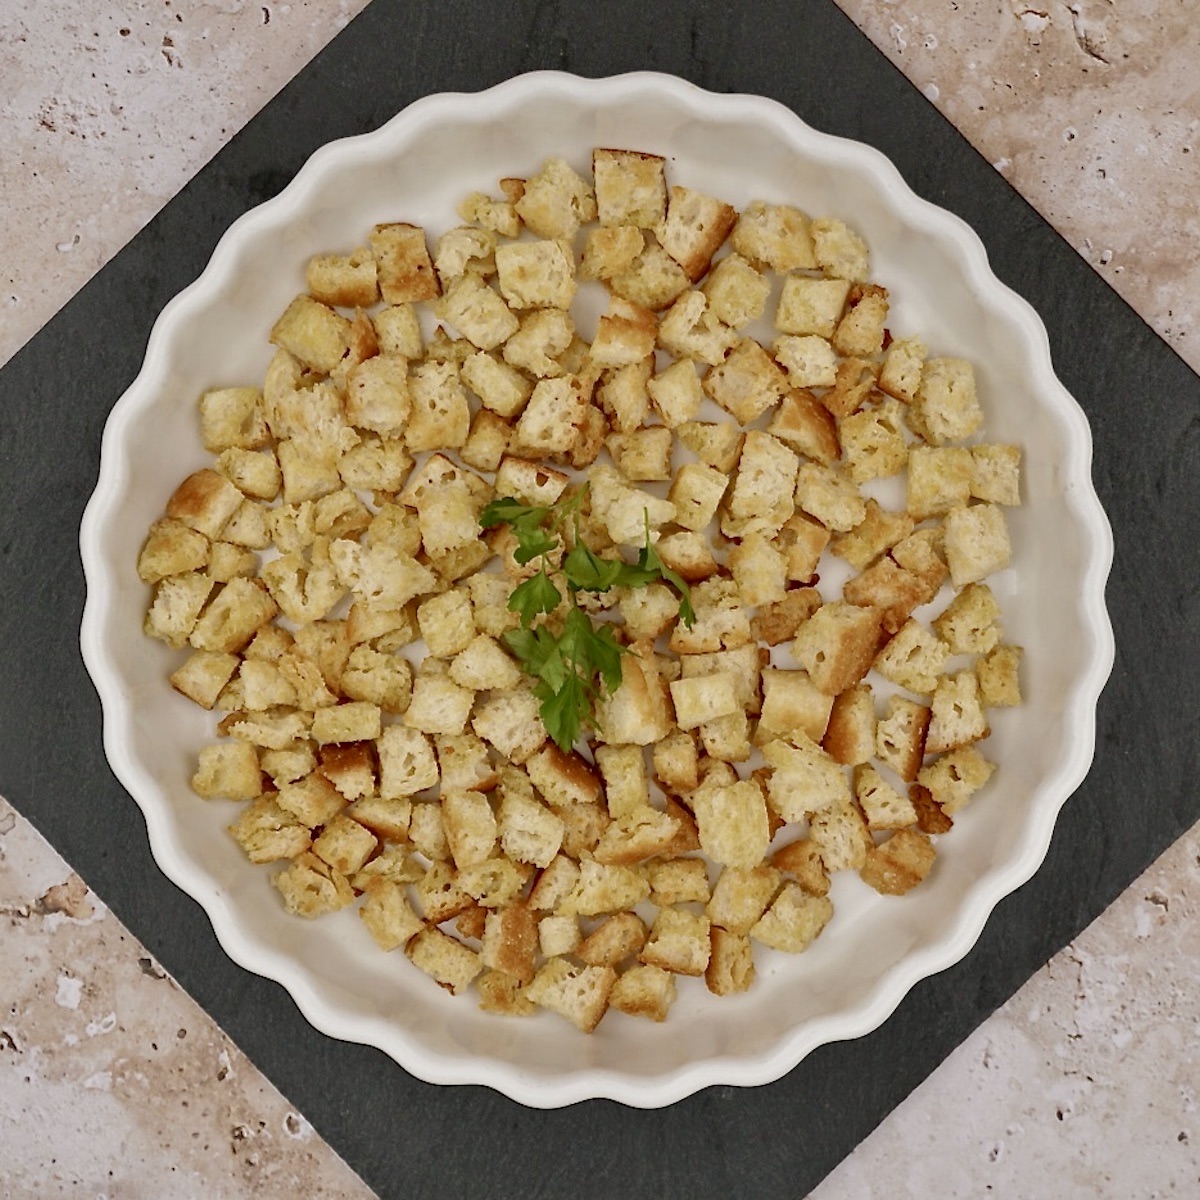 Overhead view of a bowl of homemade croutons.